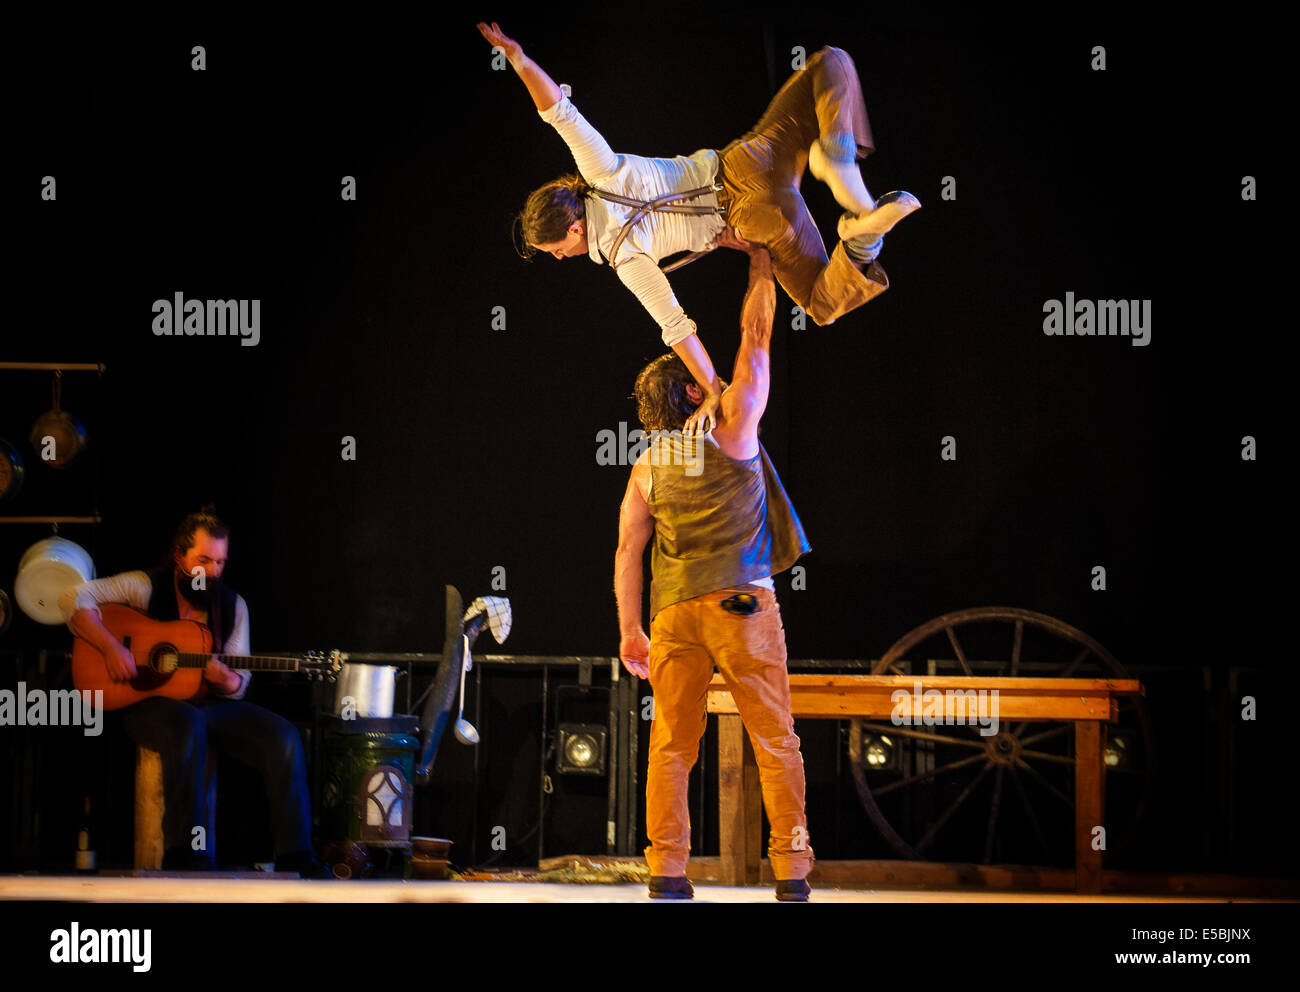 Piedmont, Province Of Turin, Italy. 25th July, 2014. Grugliasco Le Serre Performance 'Timber' By Canadian Company Cirque Alfonse Credit:  Realy Easy Star/Alamy Live News Stock Photo